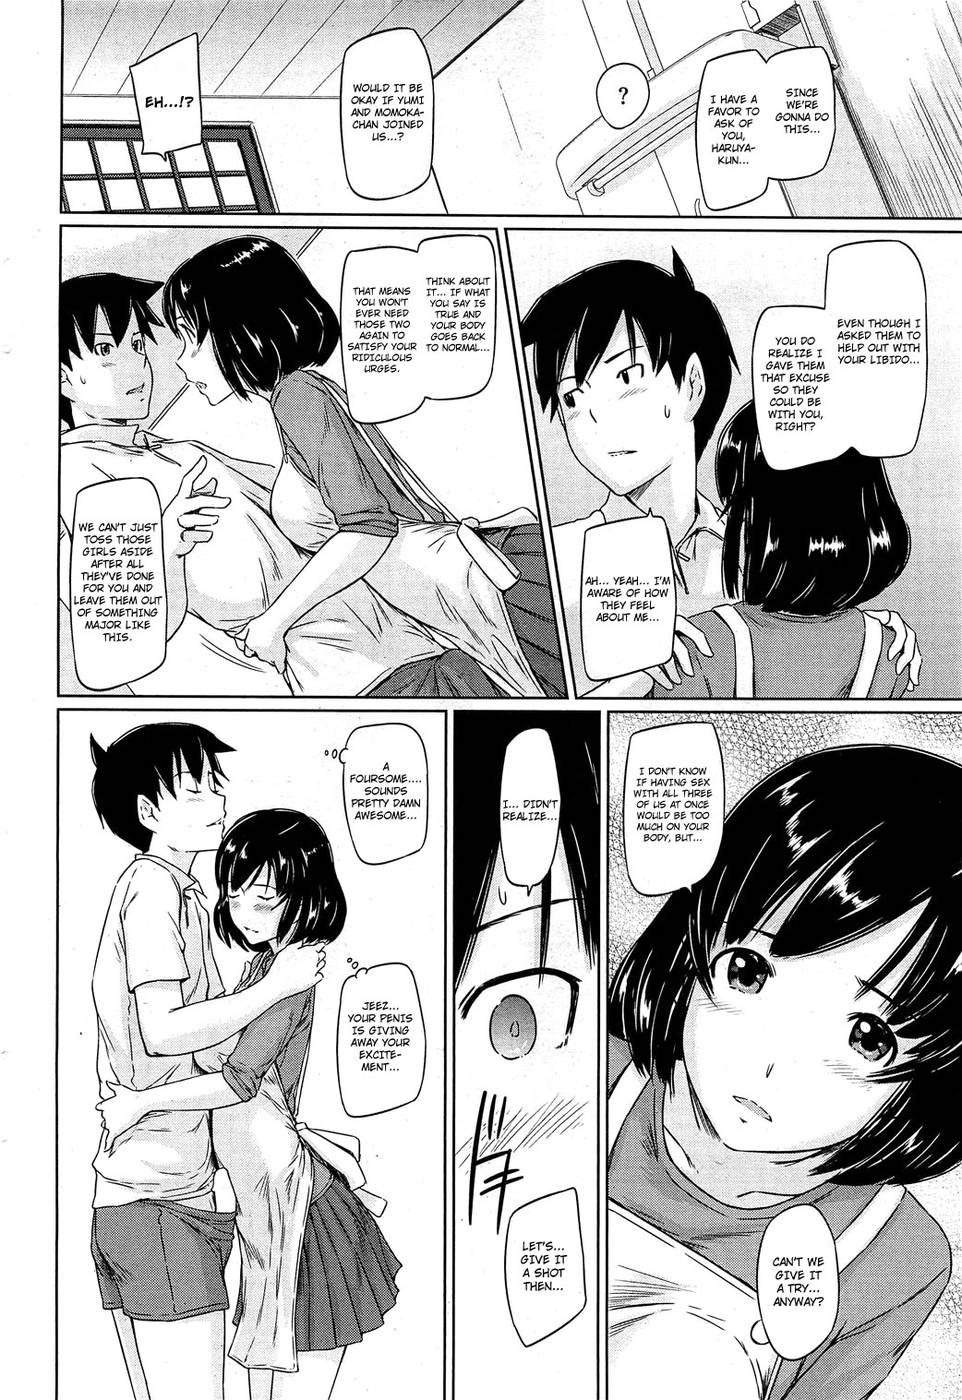 Xxxapartment Comic Pdf In Hindi - Welcome to Tokoharusou-Chapter 6-Hentai Manga Hentai Comic - Page: 4 -  Online porn video at mobile